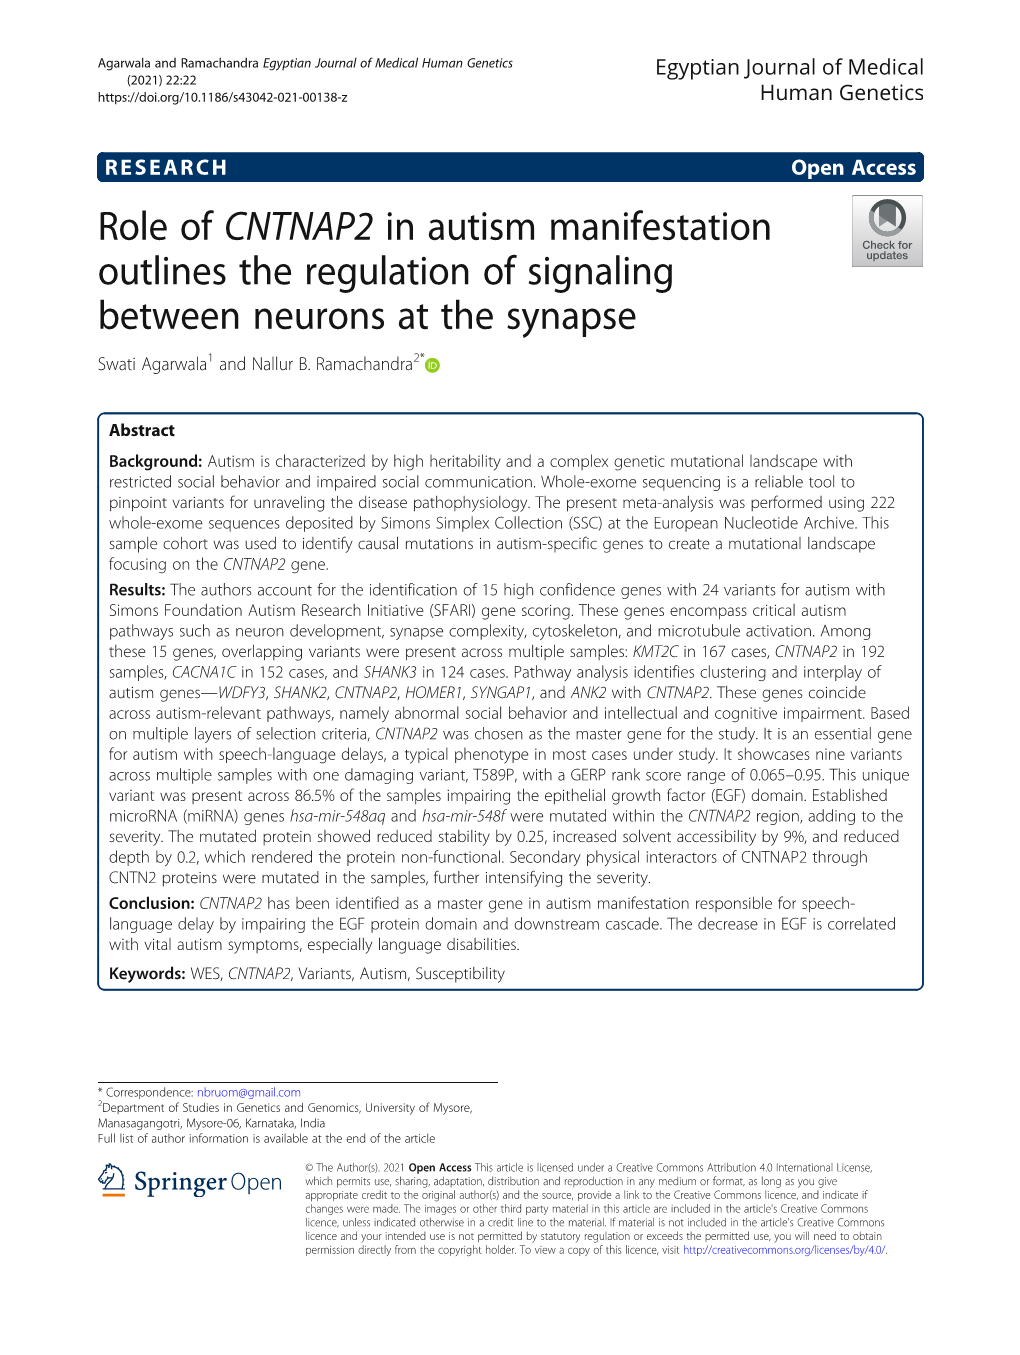 Role of CNTNAP2 in Autism Manifestation Outlines the Regulation of Signaling Between Neurons at the Synapse Swati Agarwala1 and Nallur B